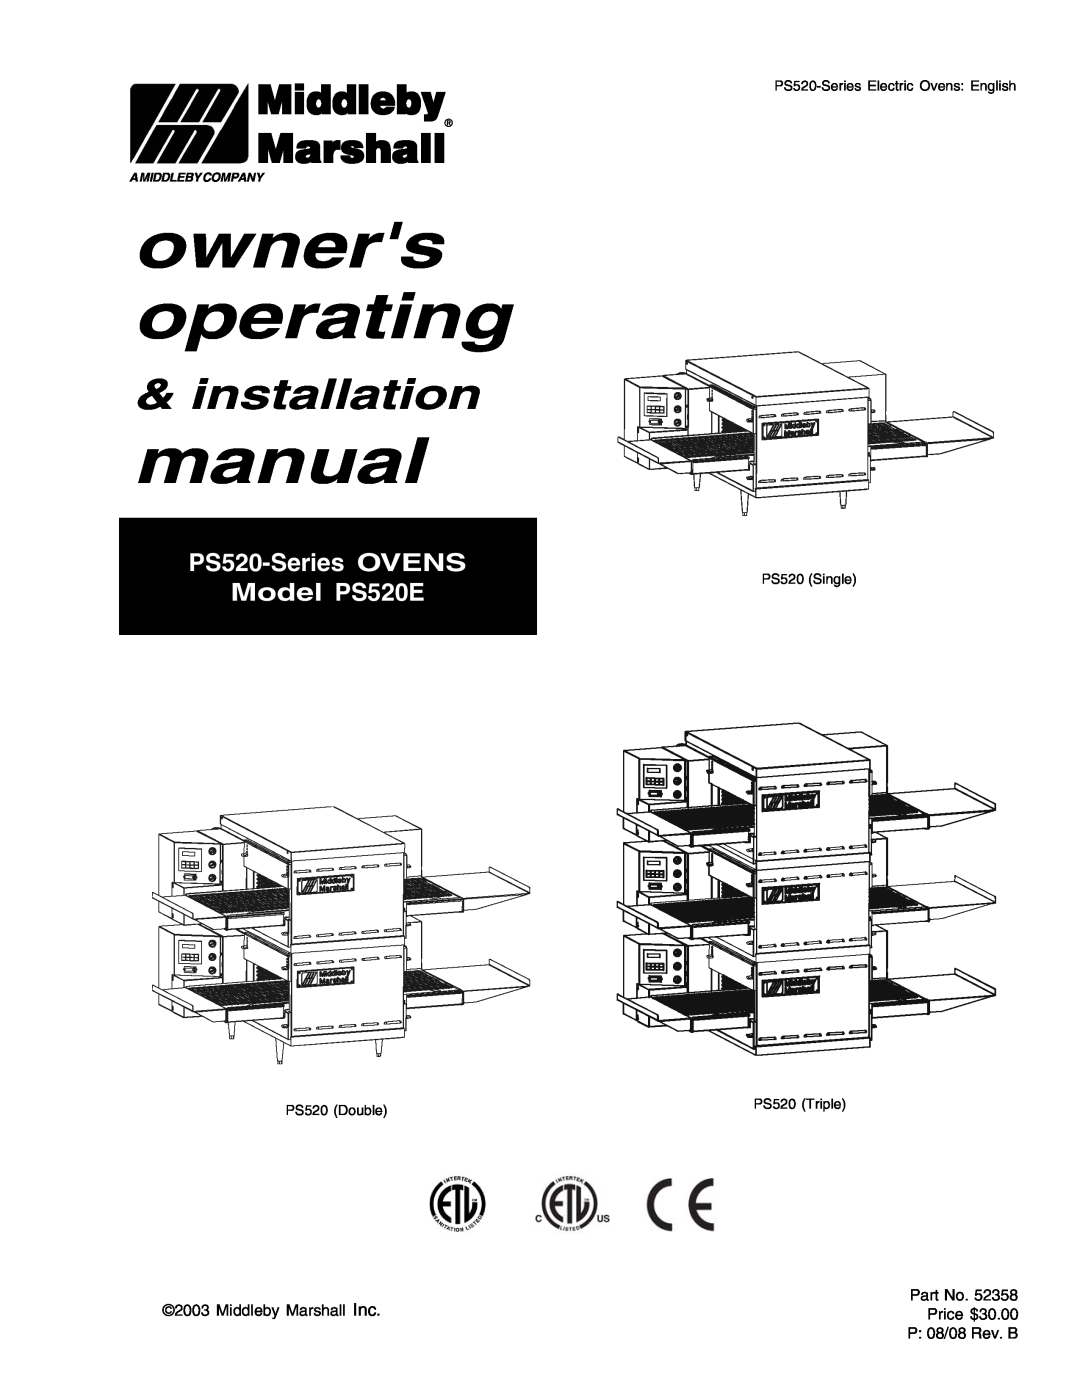 Middleby Marshall installation manual owners operating, Middleby, Marshall, PS520-SeriesOVENS Model PS520E 